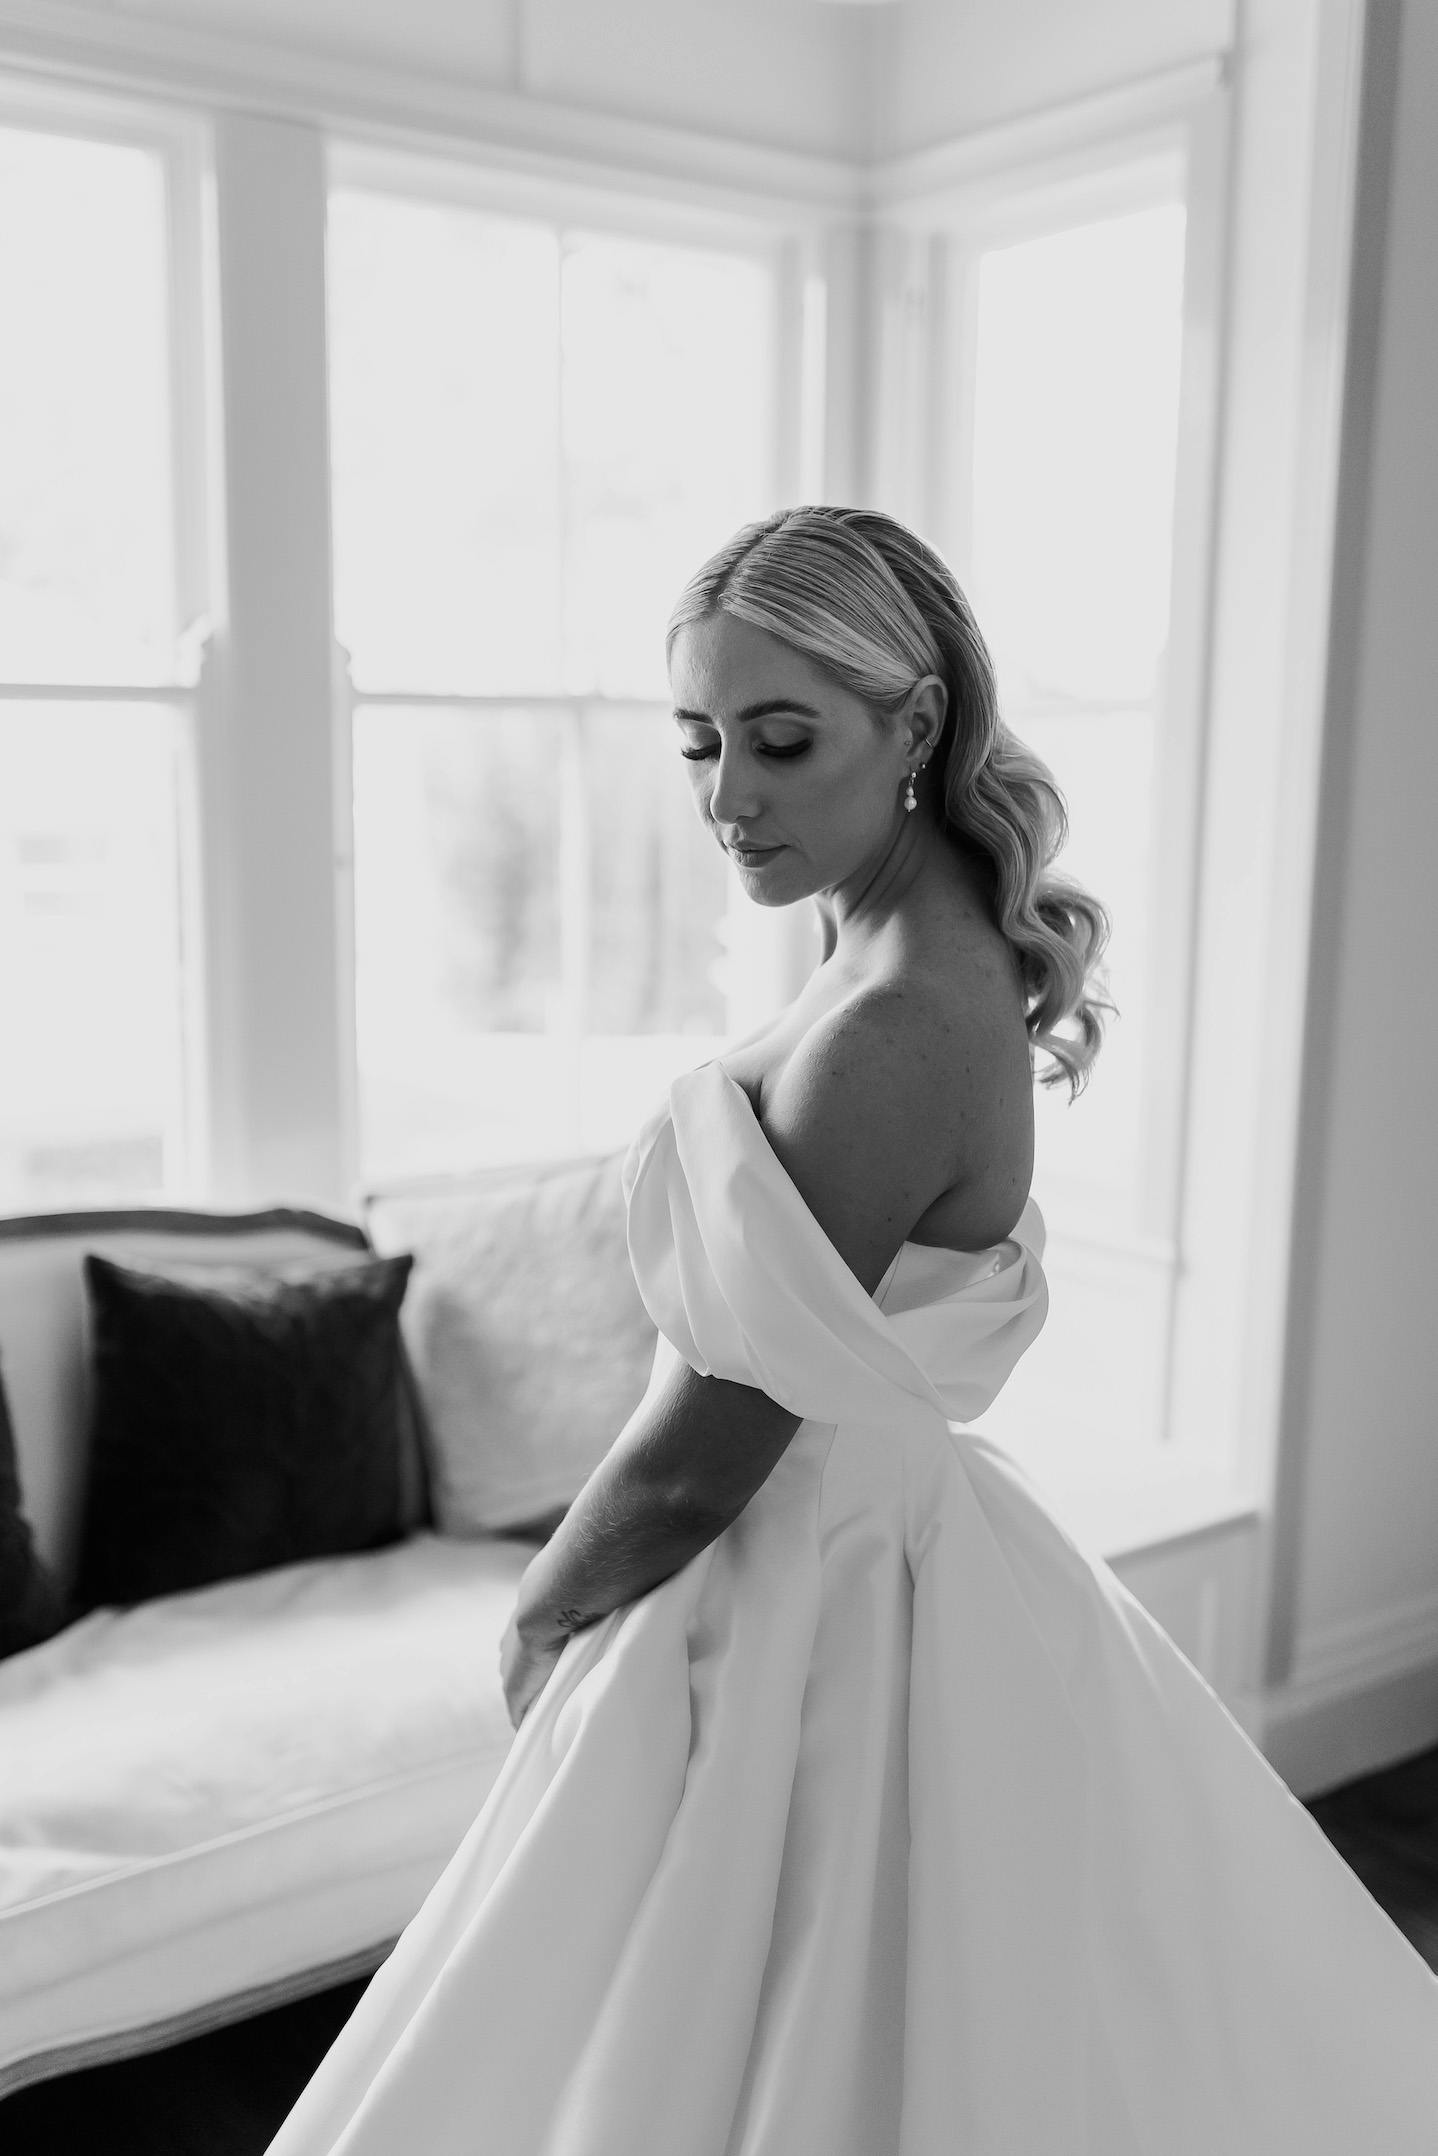 Black and white photo of a bride in an off-the-shoulder wedding gown, standing in front of a window. She has long, wavy hair and is looking down with a serene expression. Behind her, there is a cushioned bench with pillows.